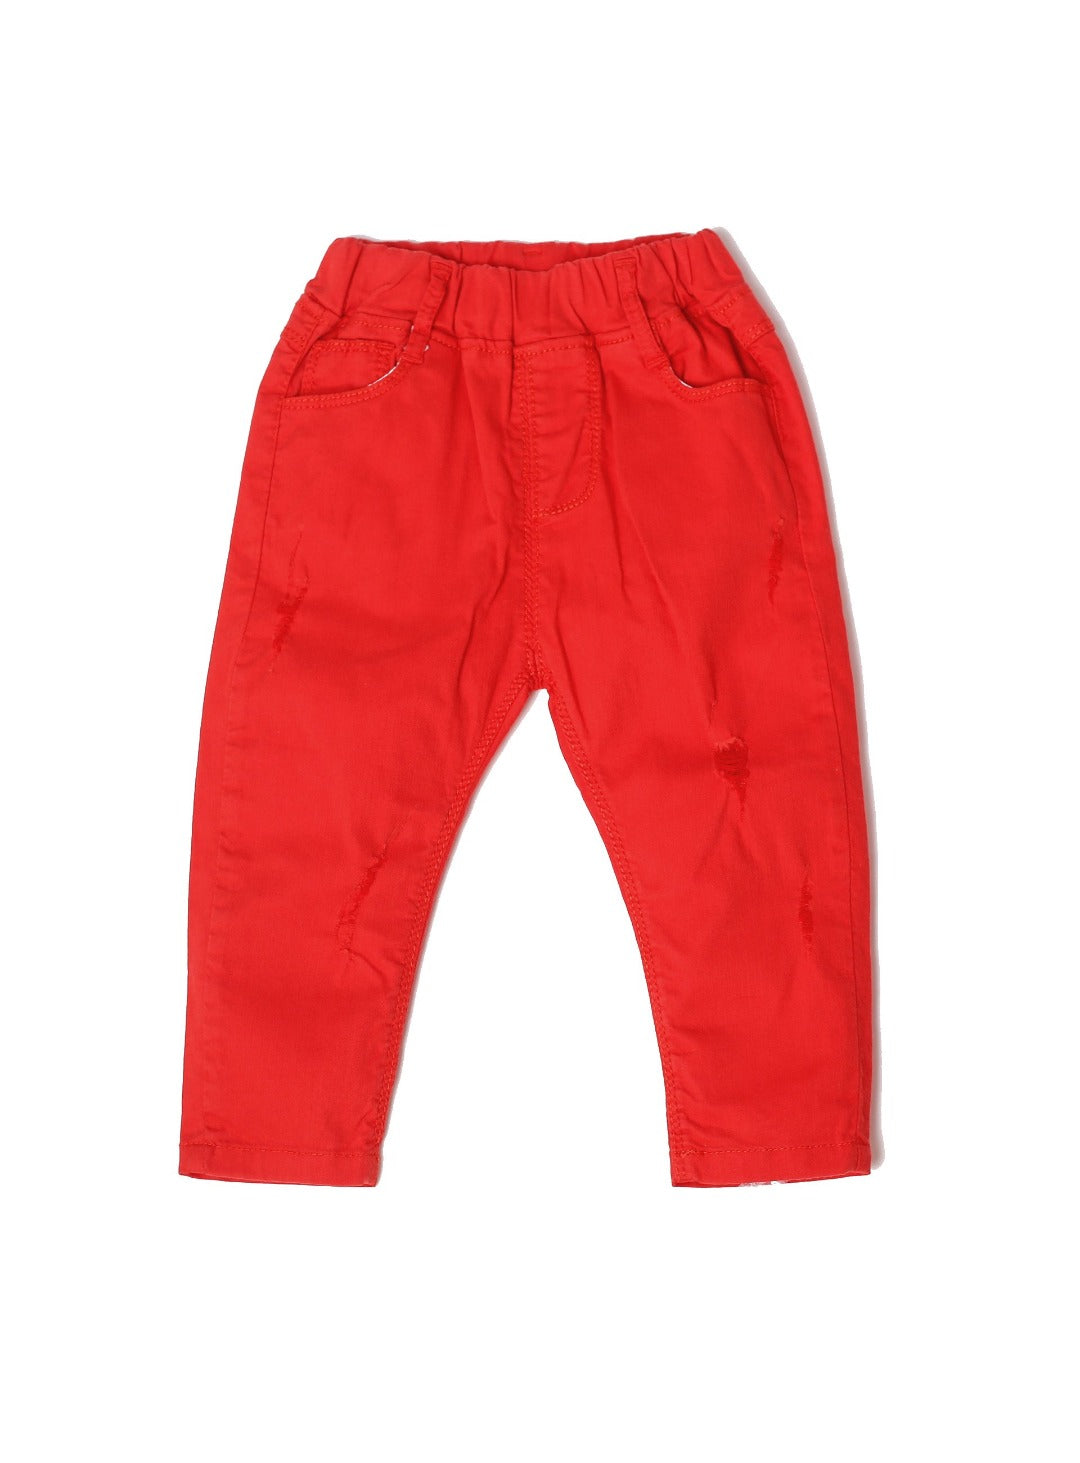 candy apple red long pants